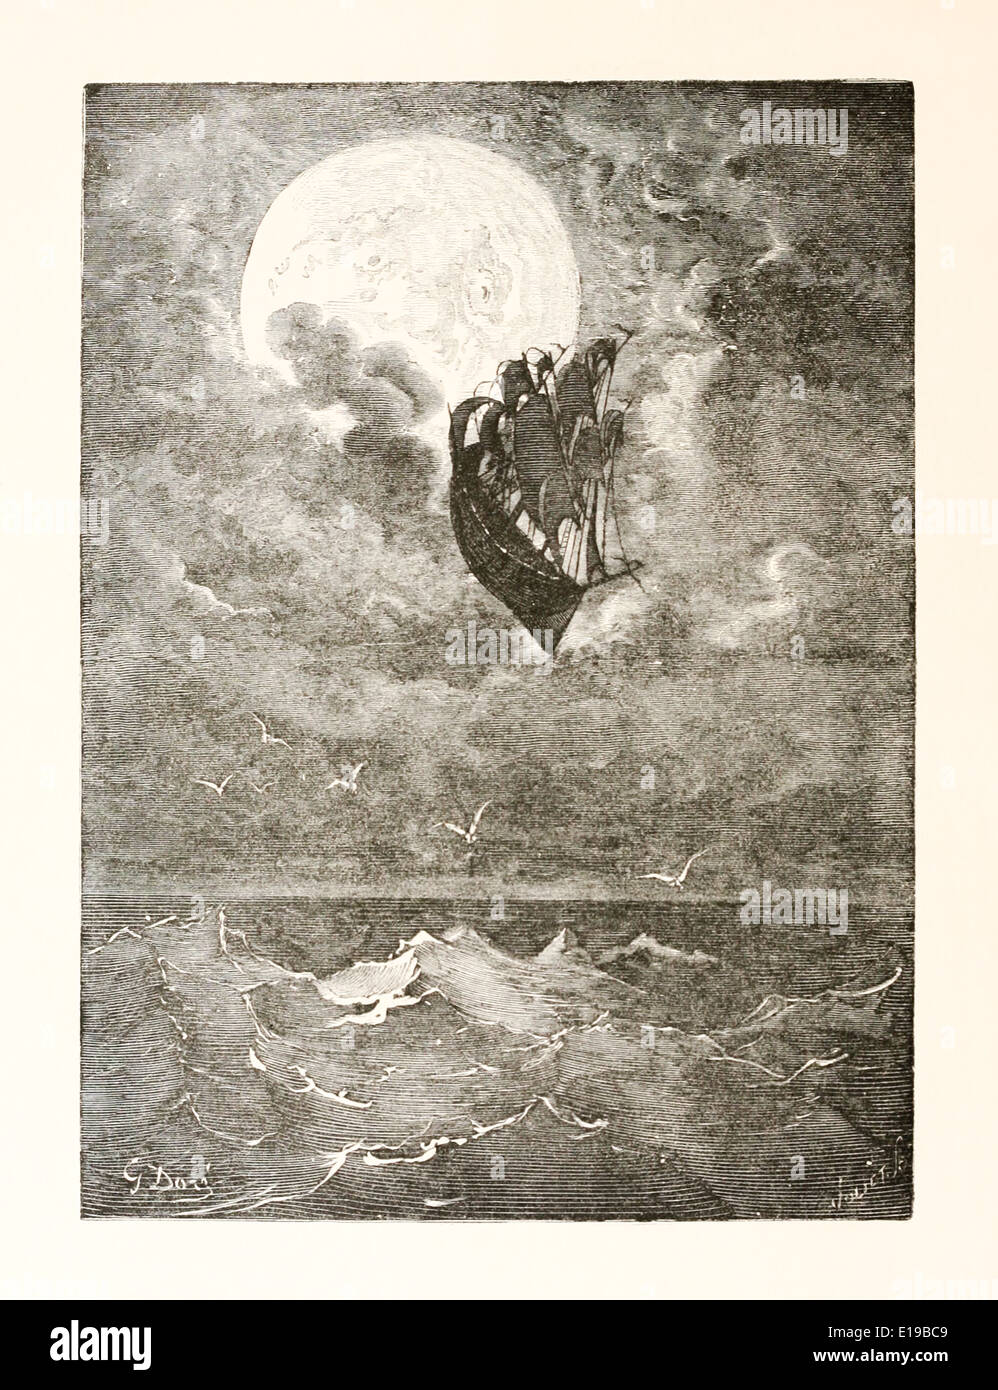 Paul Gustave Doré (1832-1883) illustration from ‘The Adventures of Baron Munchausen’ by Rudoph Raspe published in 1862. Moon Stock Photo